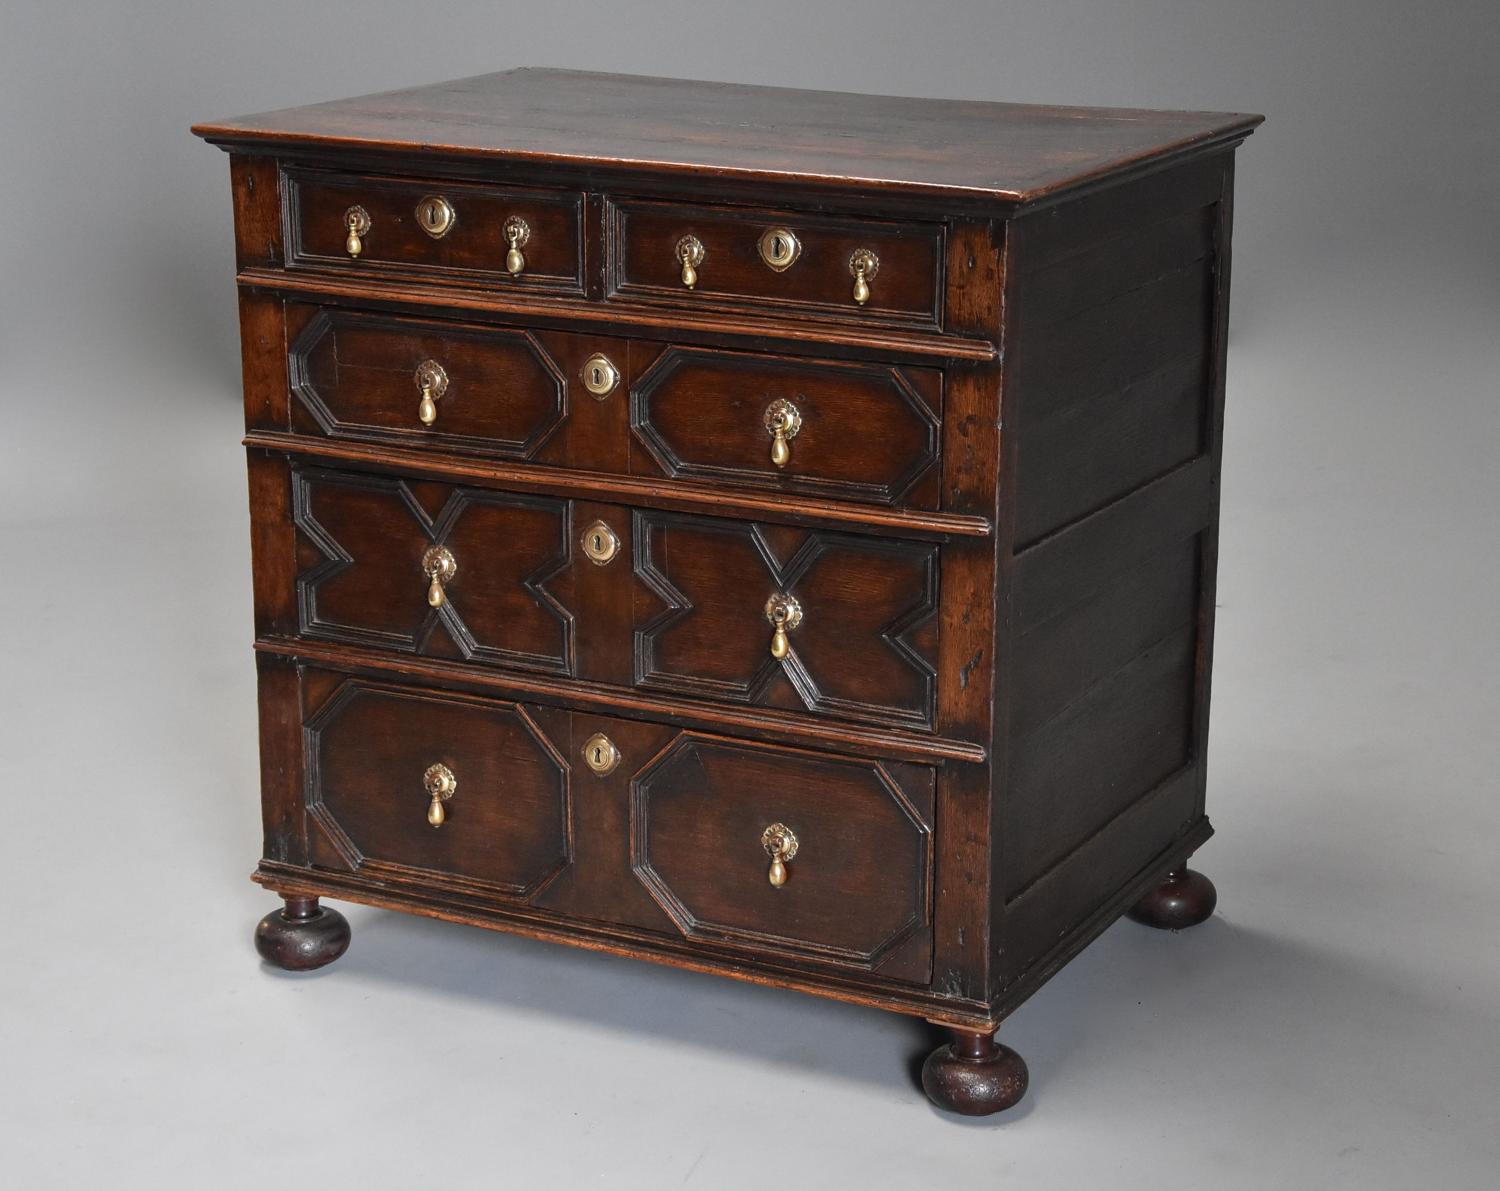 Late 17th/early 18th century oak moulded front chest of drawers